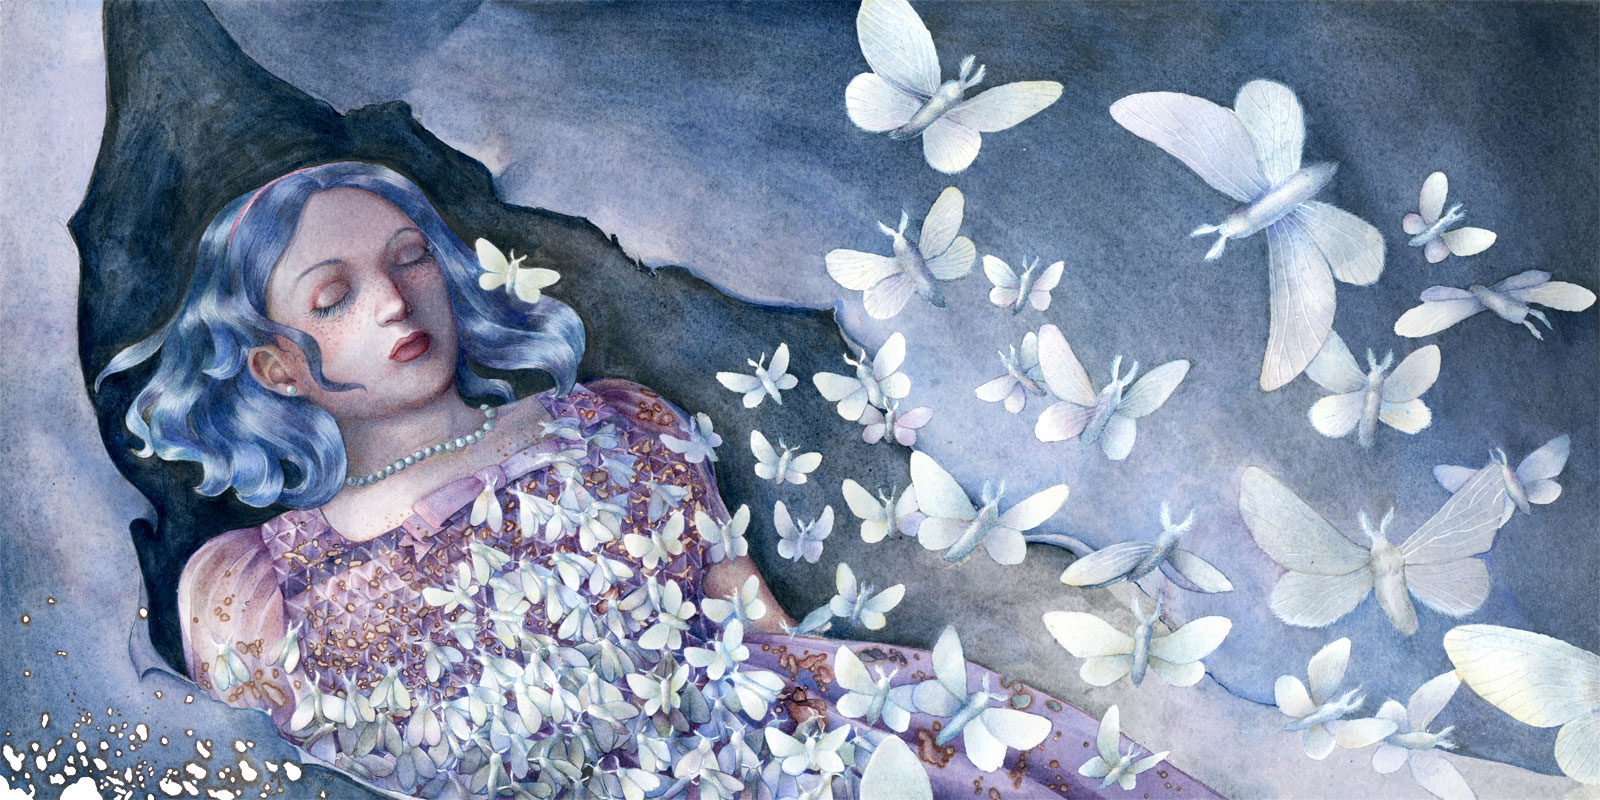 A blue-haired young girl lies dead with her features intacts, her purple dress eaten by a flock of moths that fly away from her body.